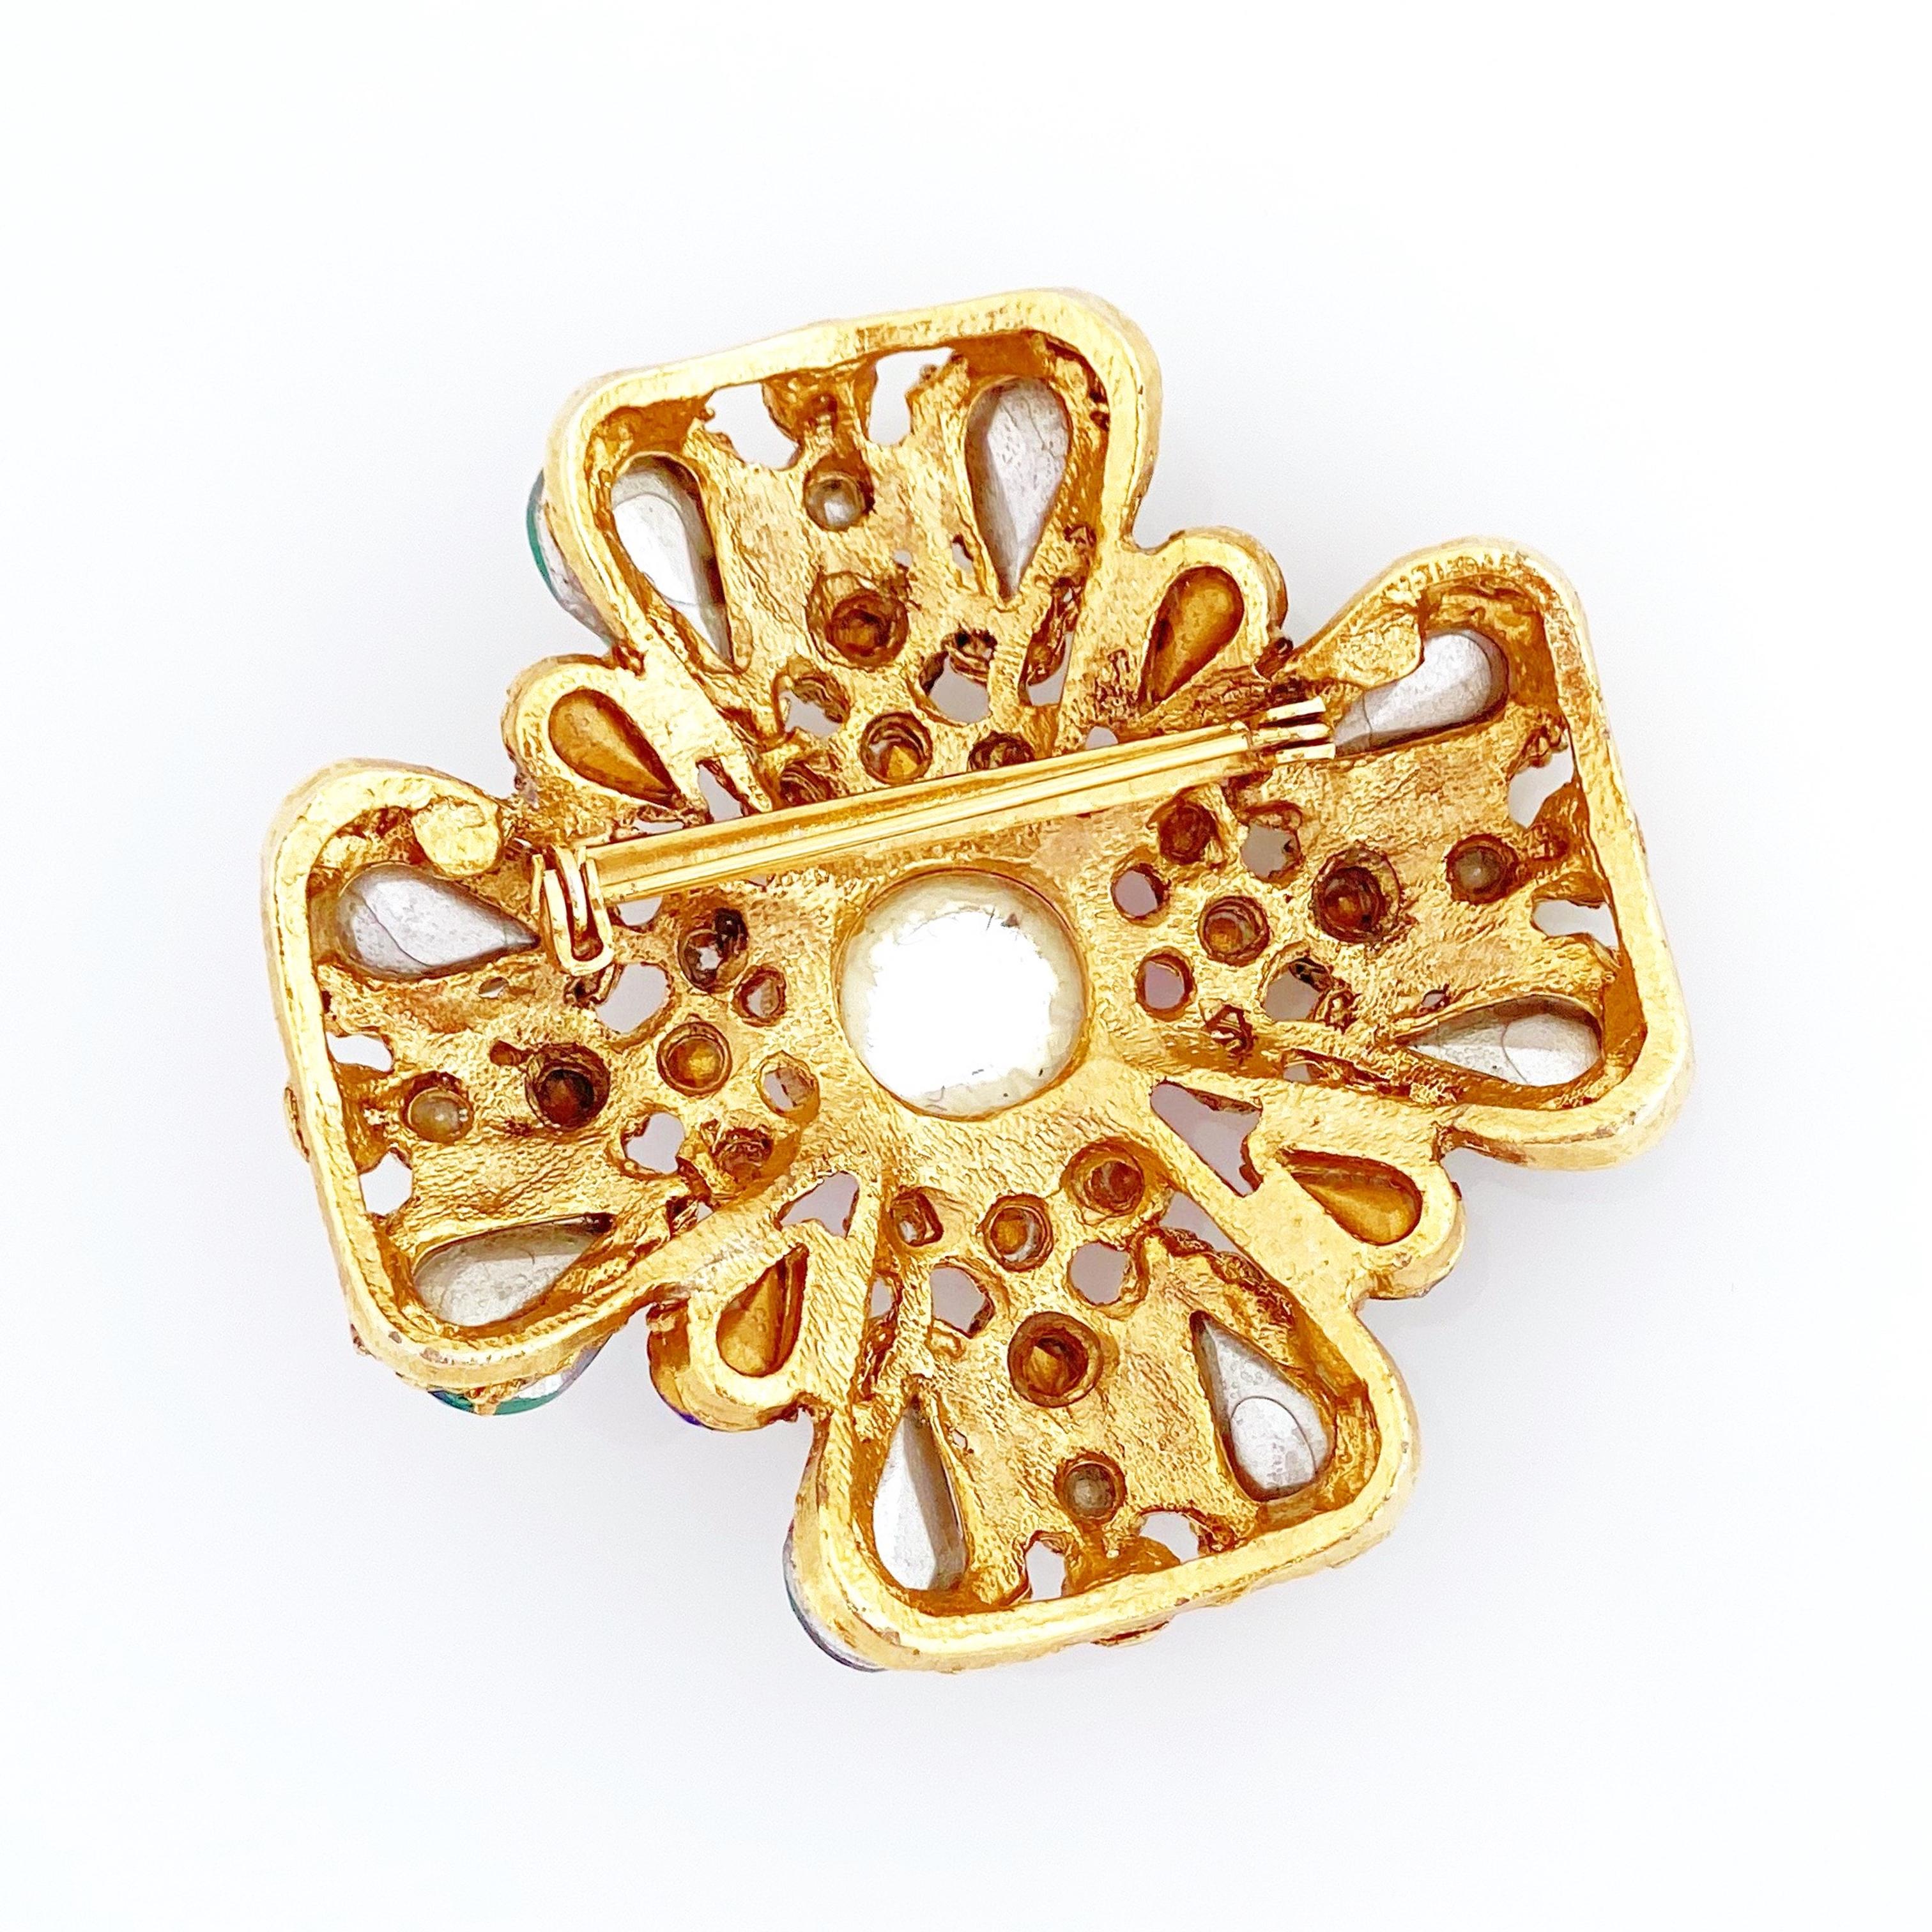 Women's Ornate Maltese Cross Brooch With Molded Glass & Rhinestones By Florenza, 1960s For Sale